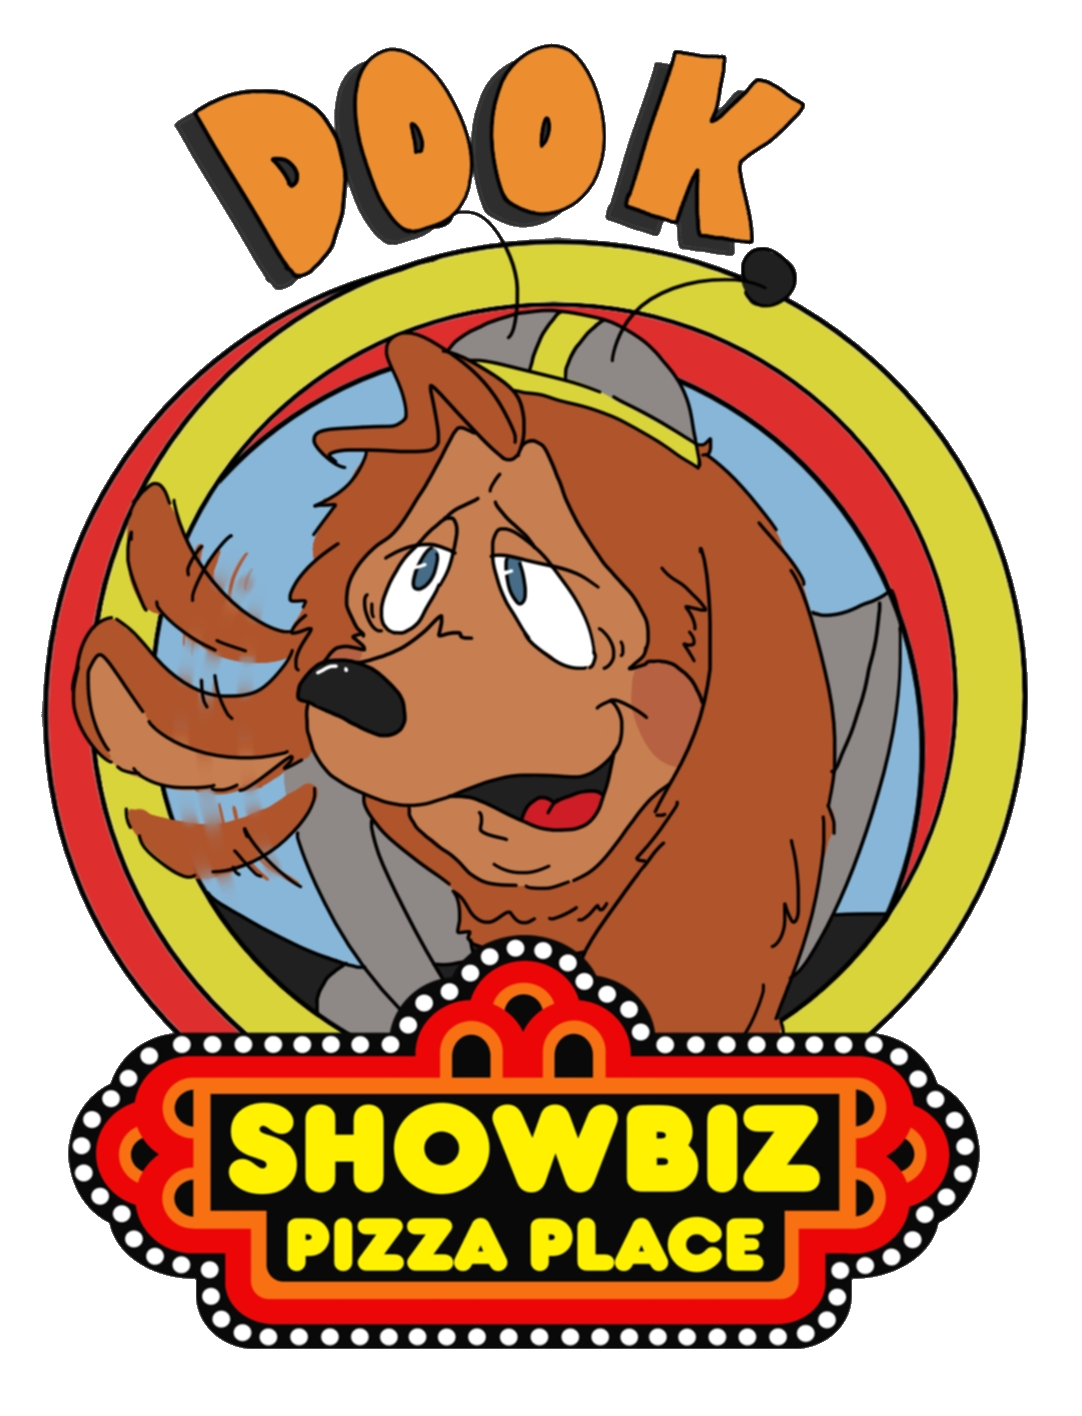 A digital drawing of Dook Larue with the showbiz pizza logo.